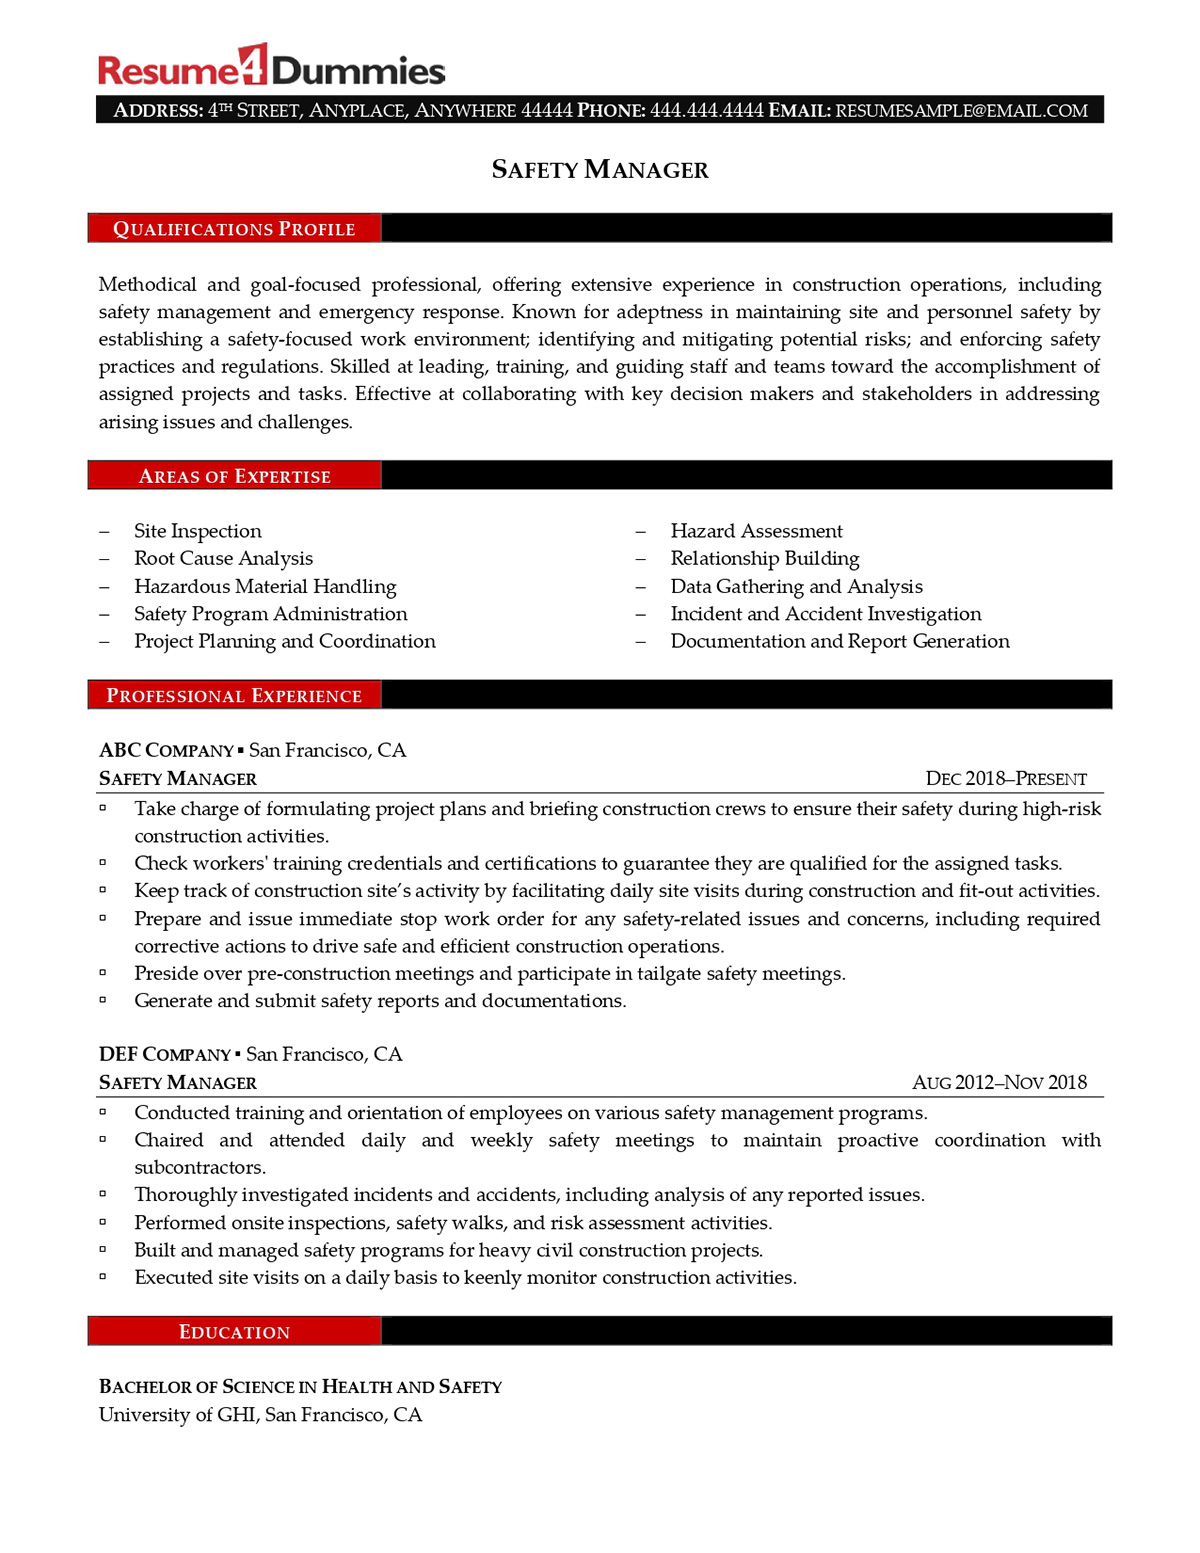 Resume4 Dummies safety manager resume example